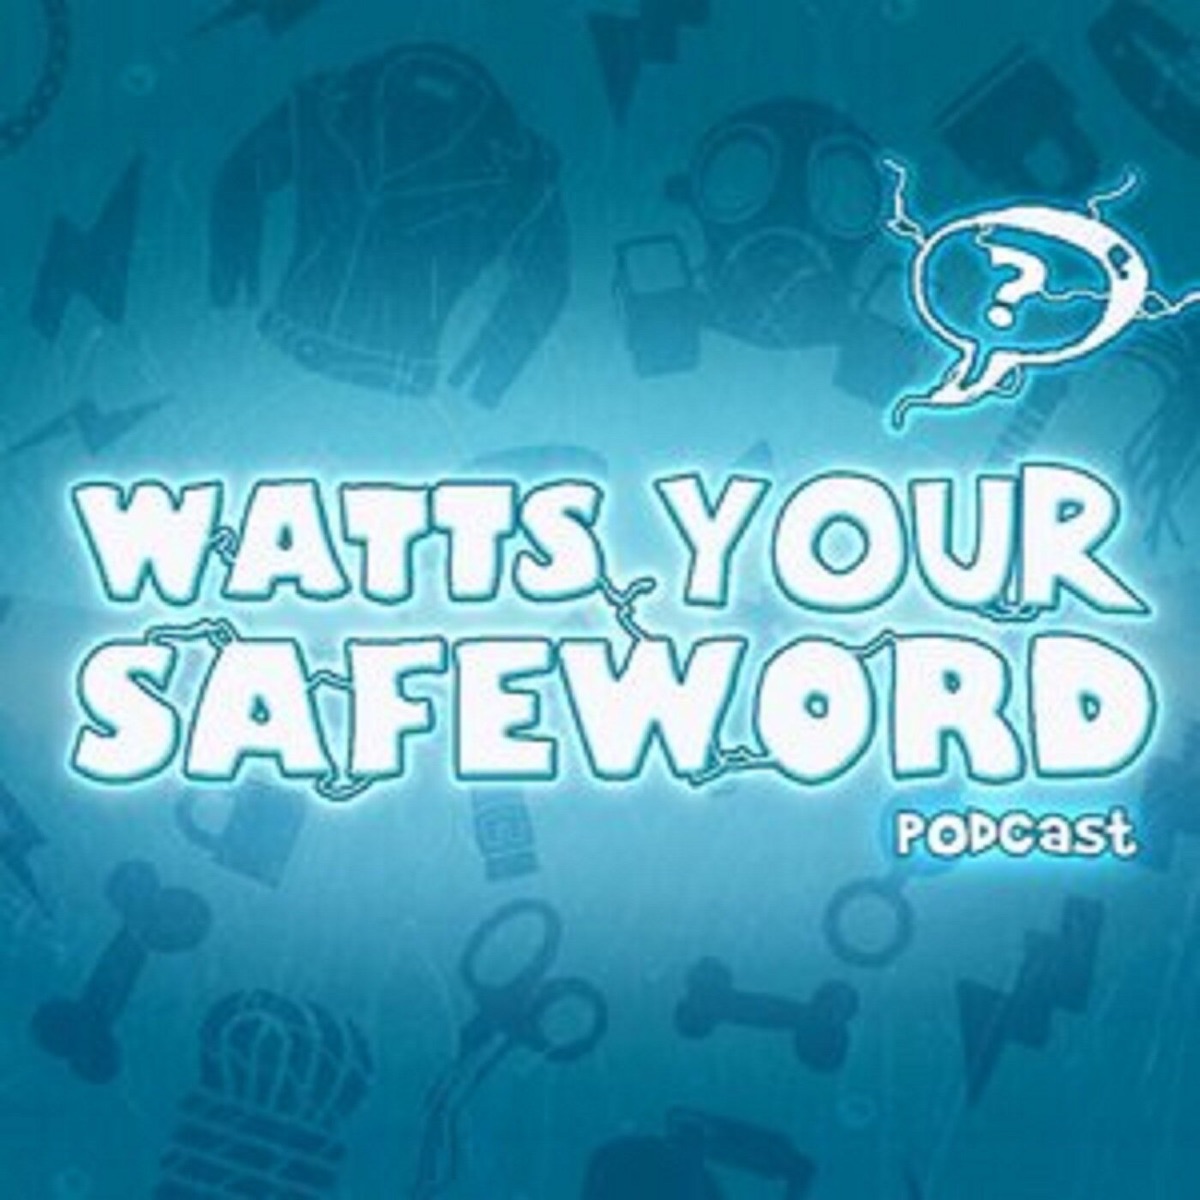 Watts Your Safeword Podcast Podtail